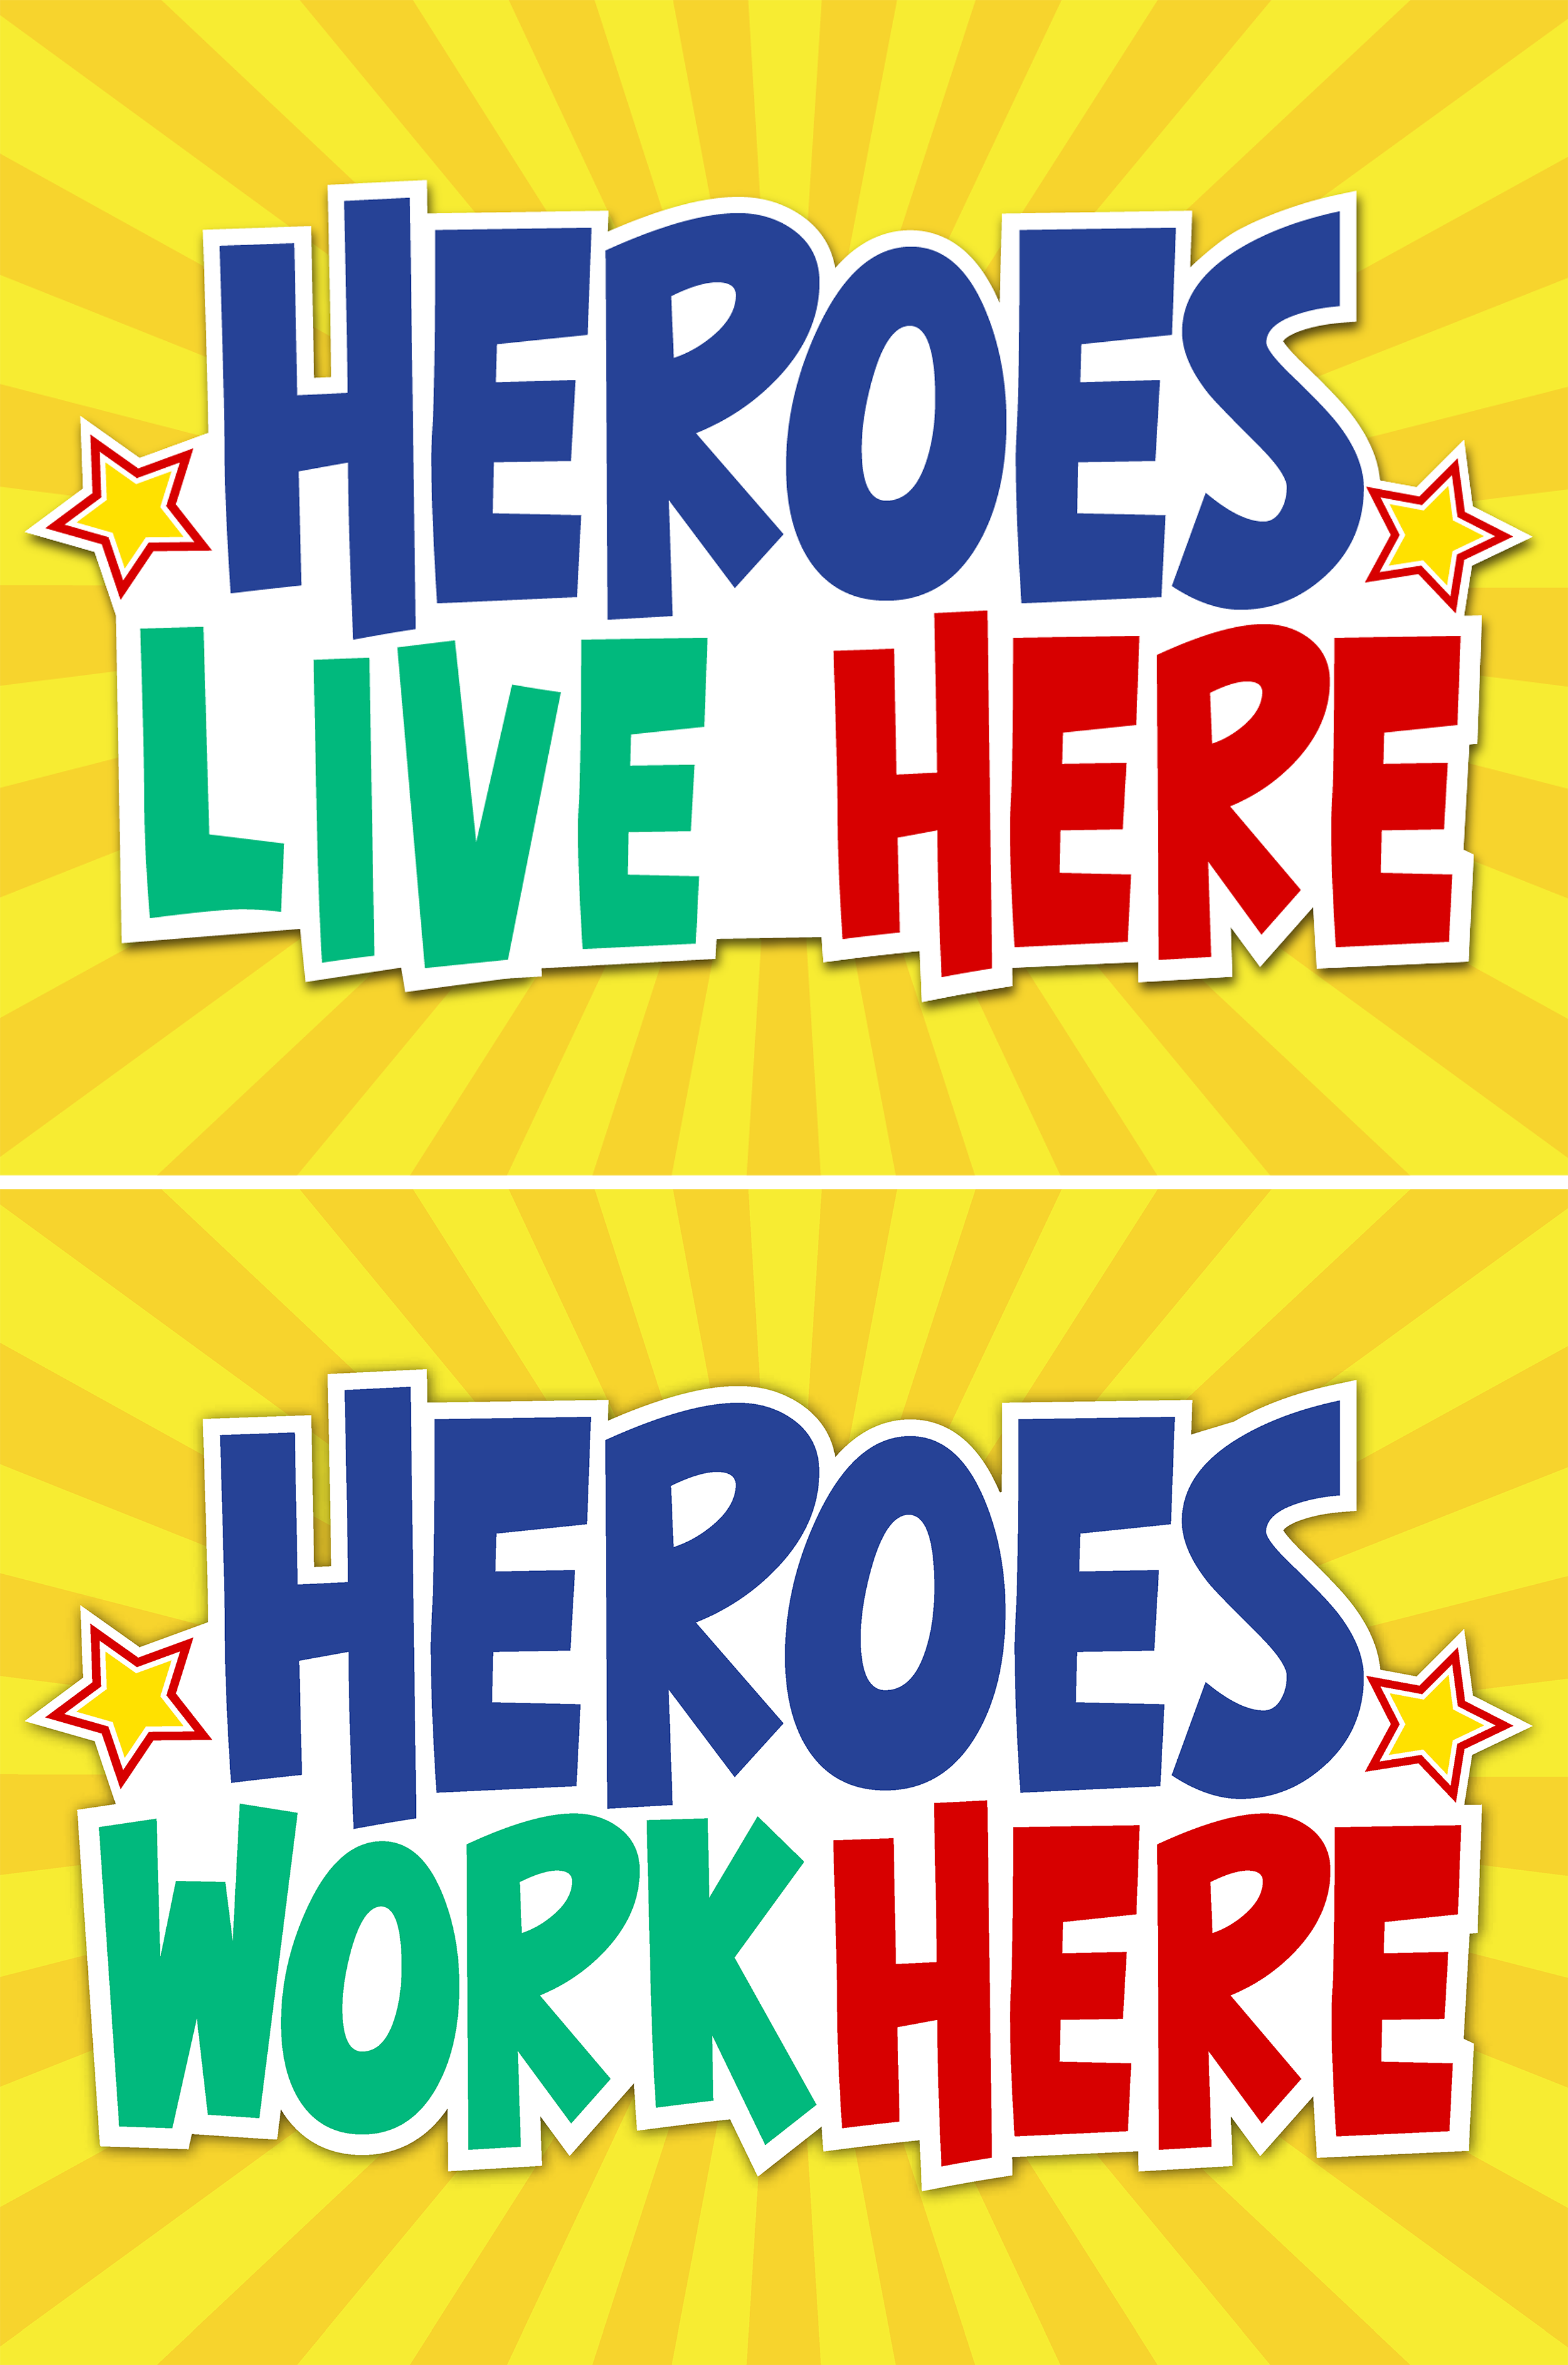 20 Pack of 18"x24" Heroes Work Here Yard Signs with stakes